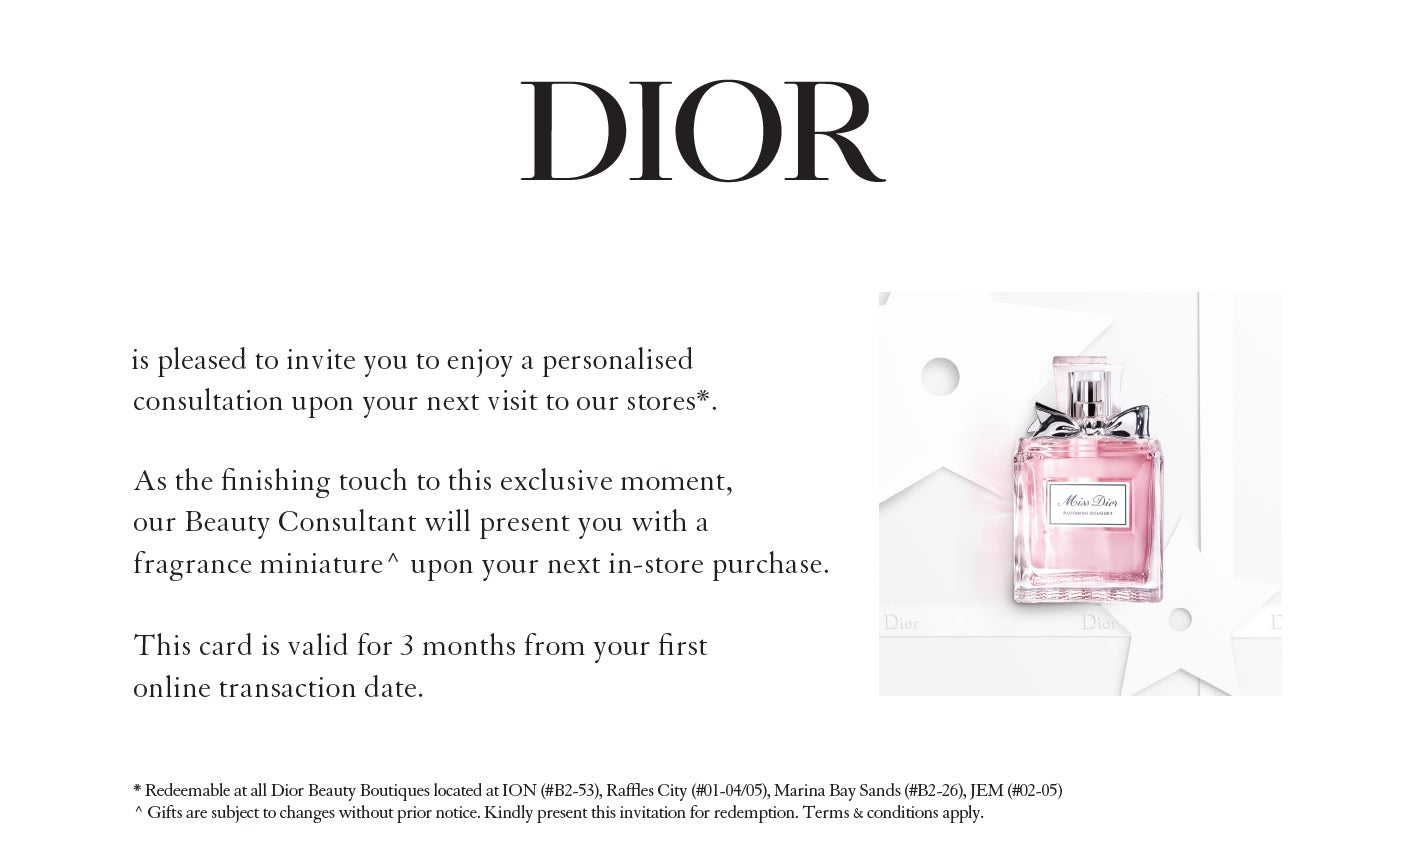 Second Purchase Card Invitation – Dior Beauty Online Boutique Malaysia